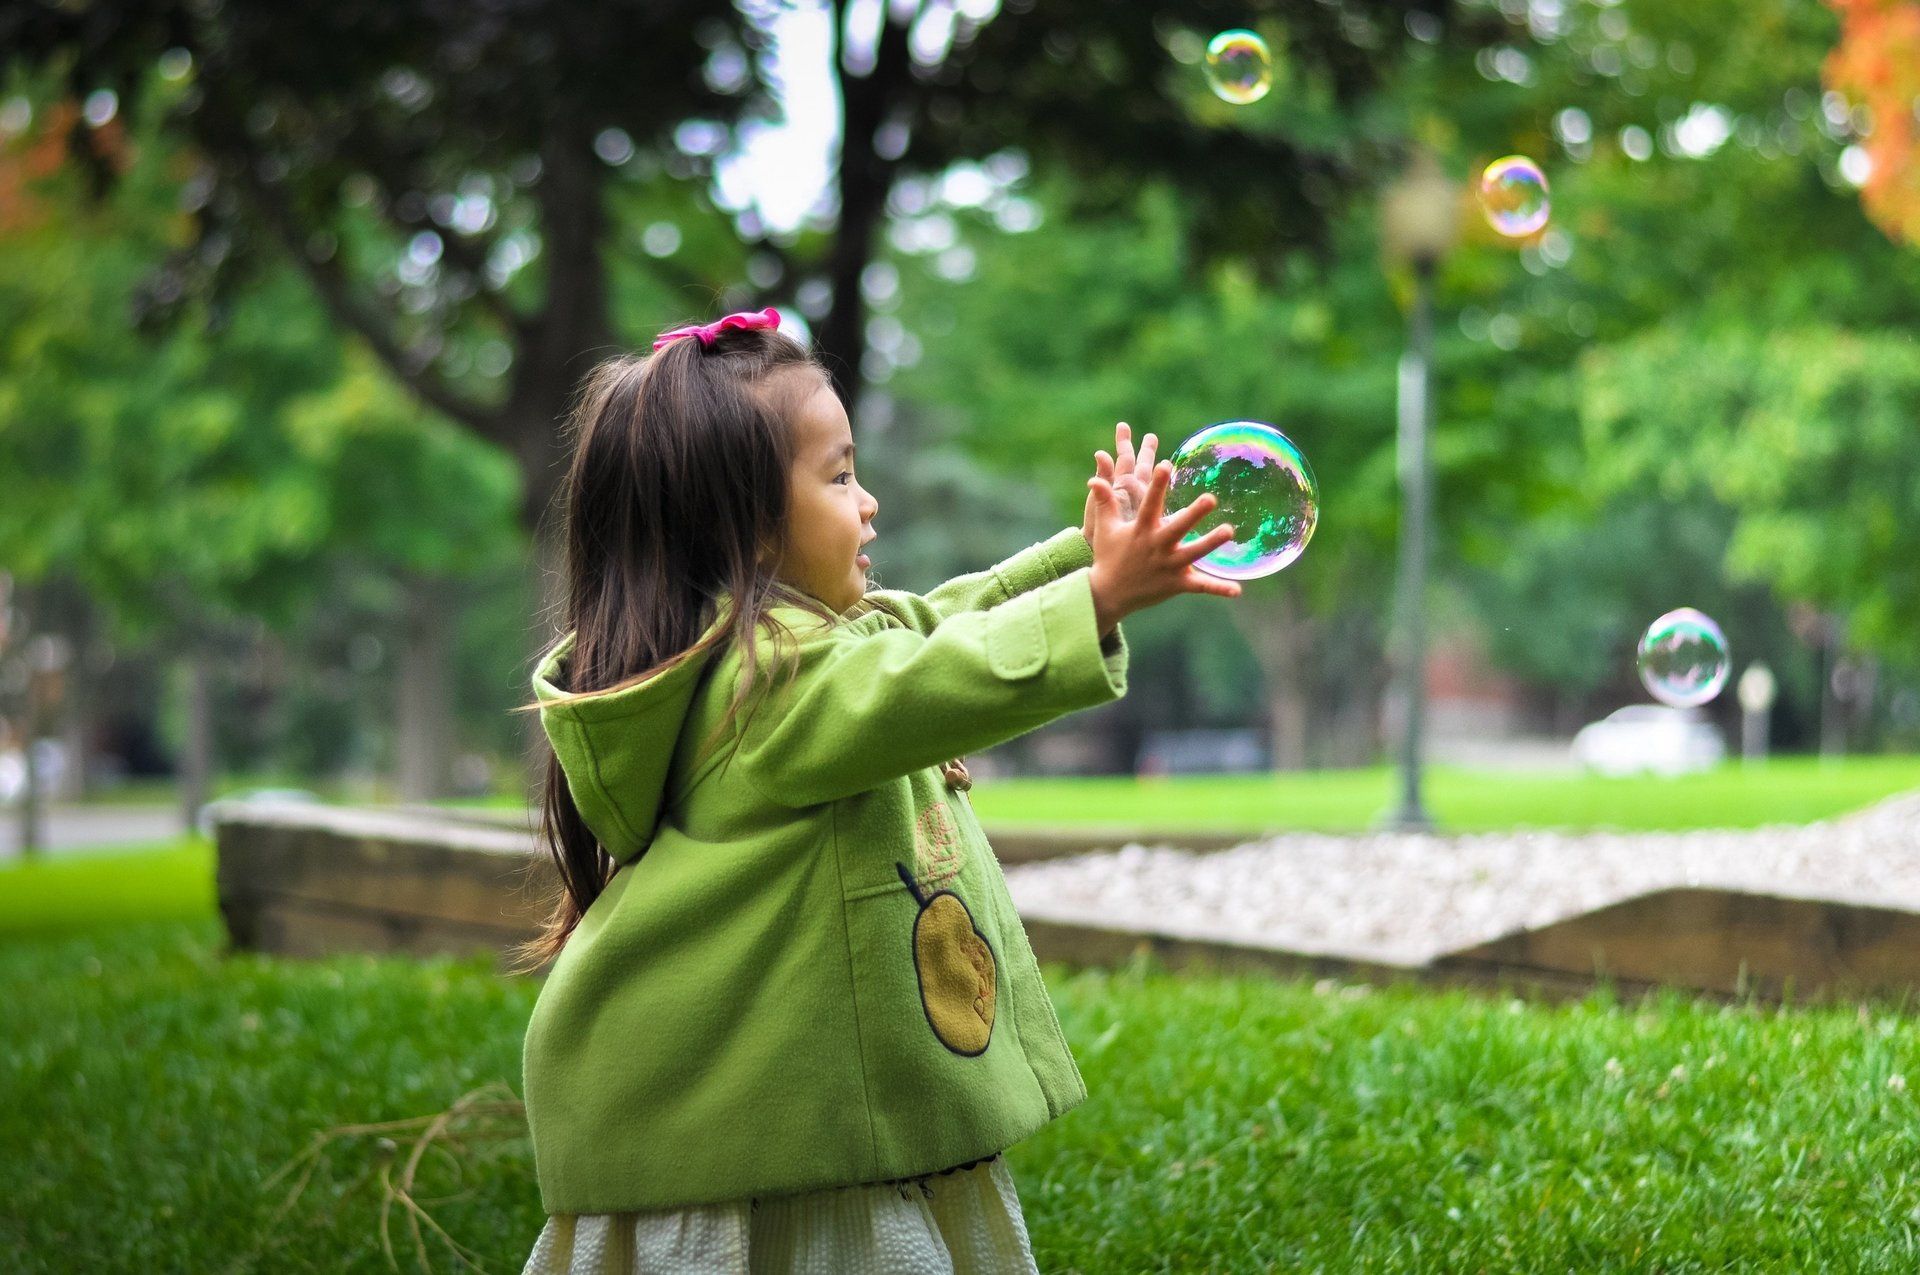 A little girl is playing with soap bubbles in a park.